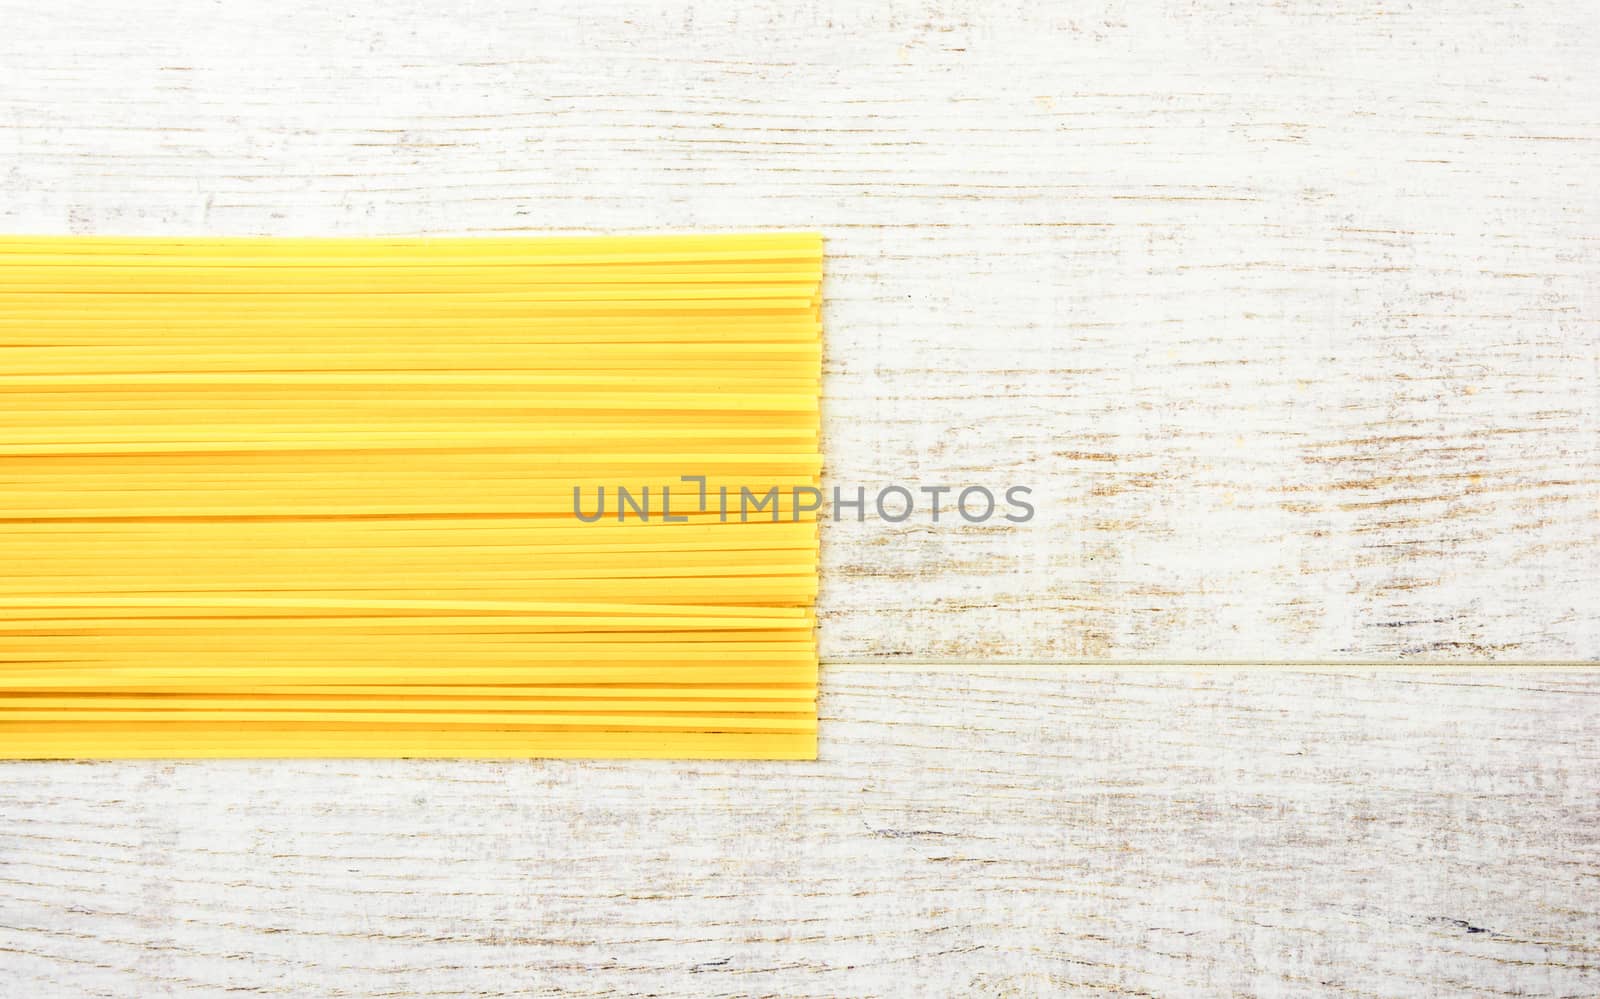 Italian raw pasta on a white surface. Top view, copy space.